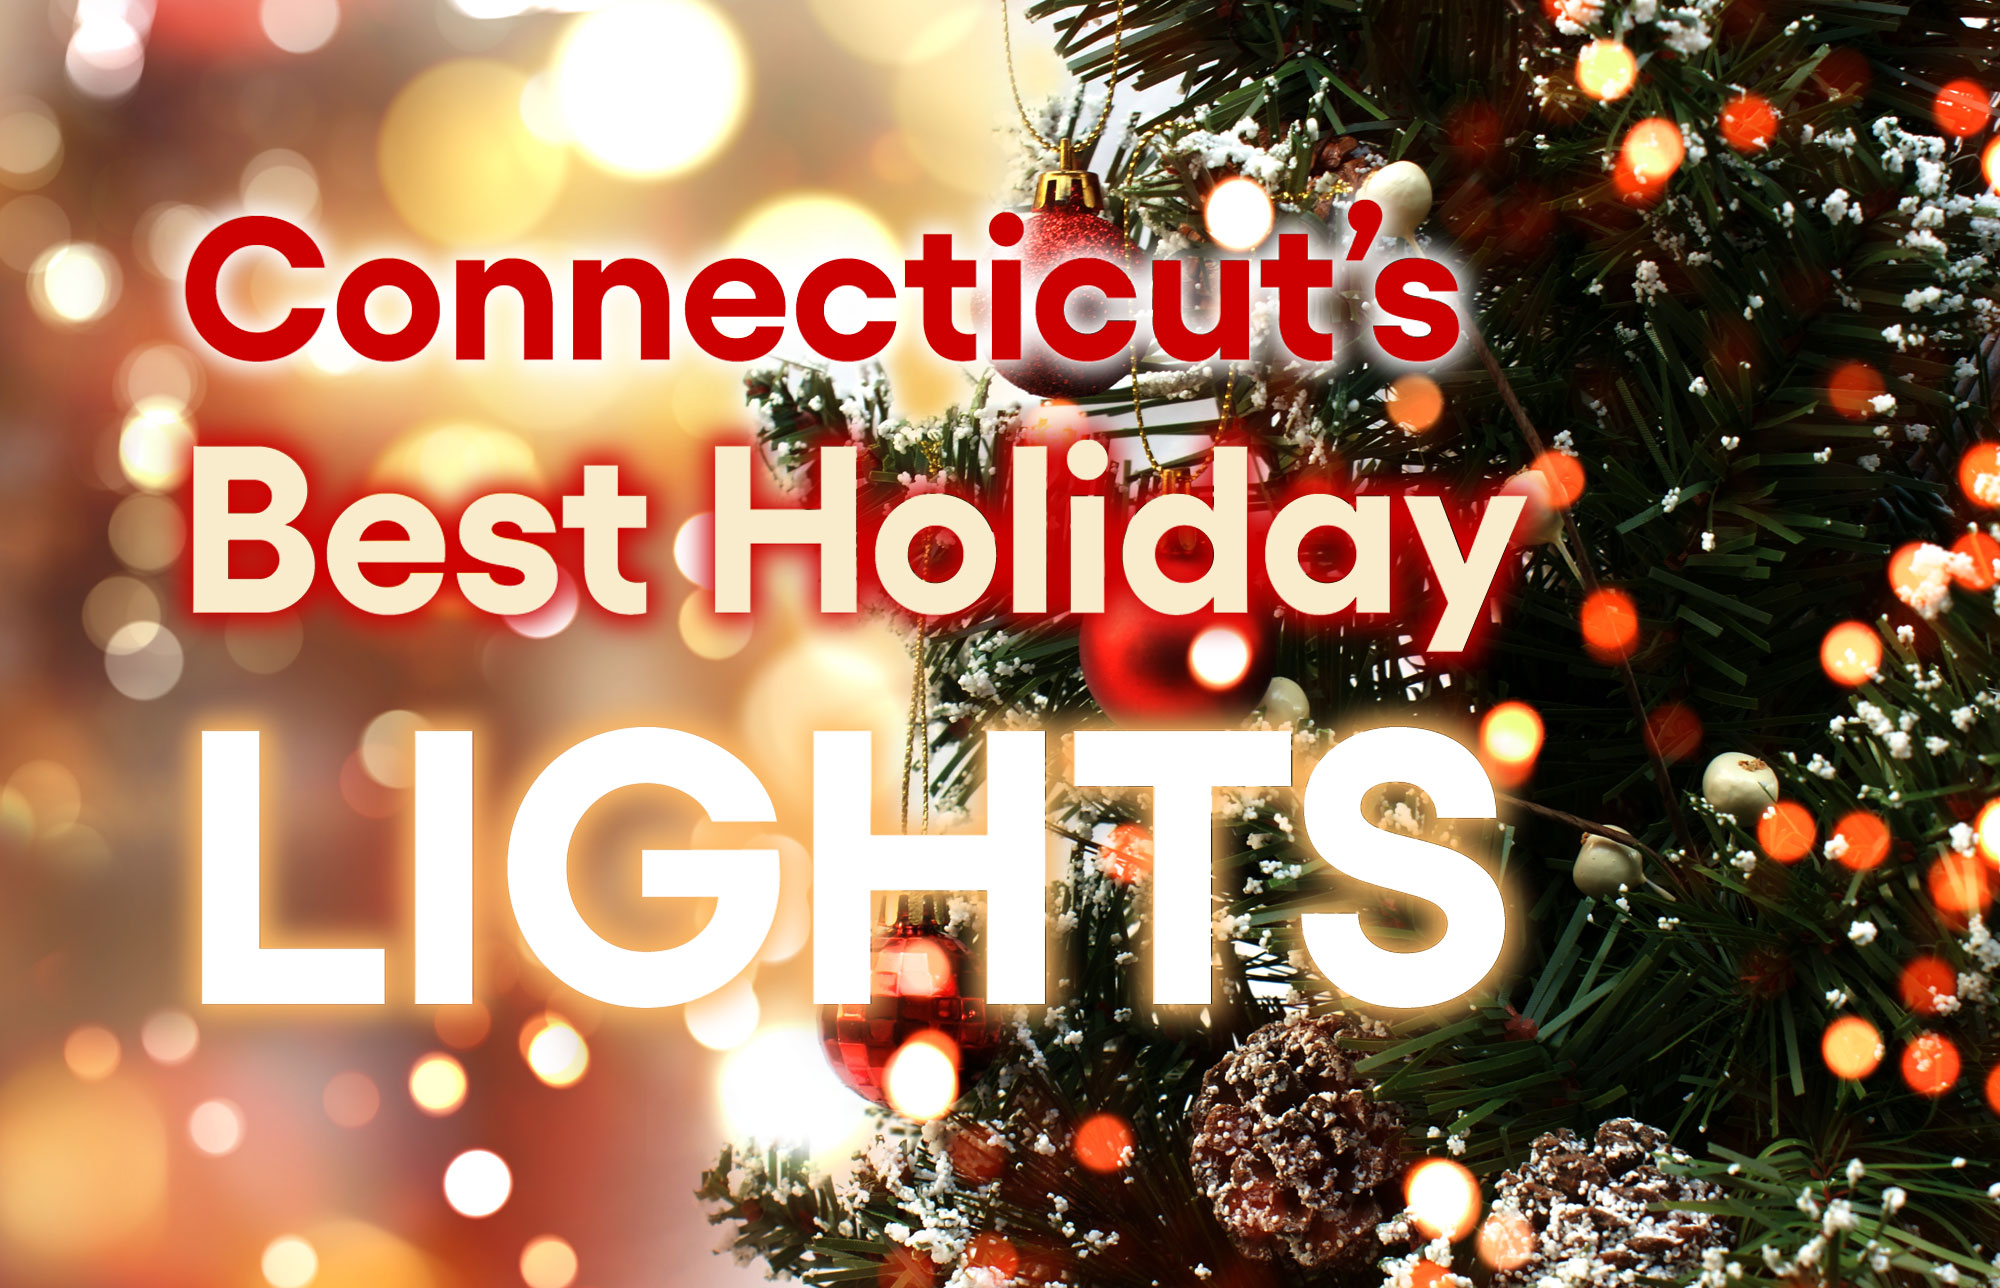 Connecticut's Best Holiday Christmas Light Displays